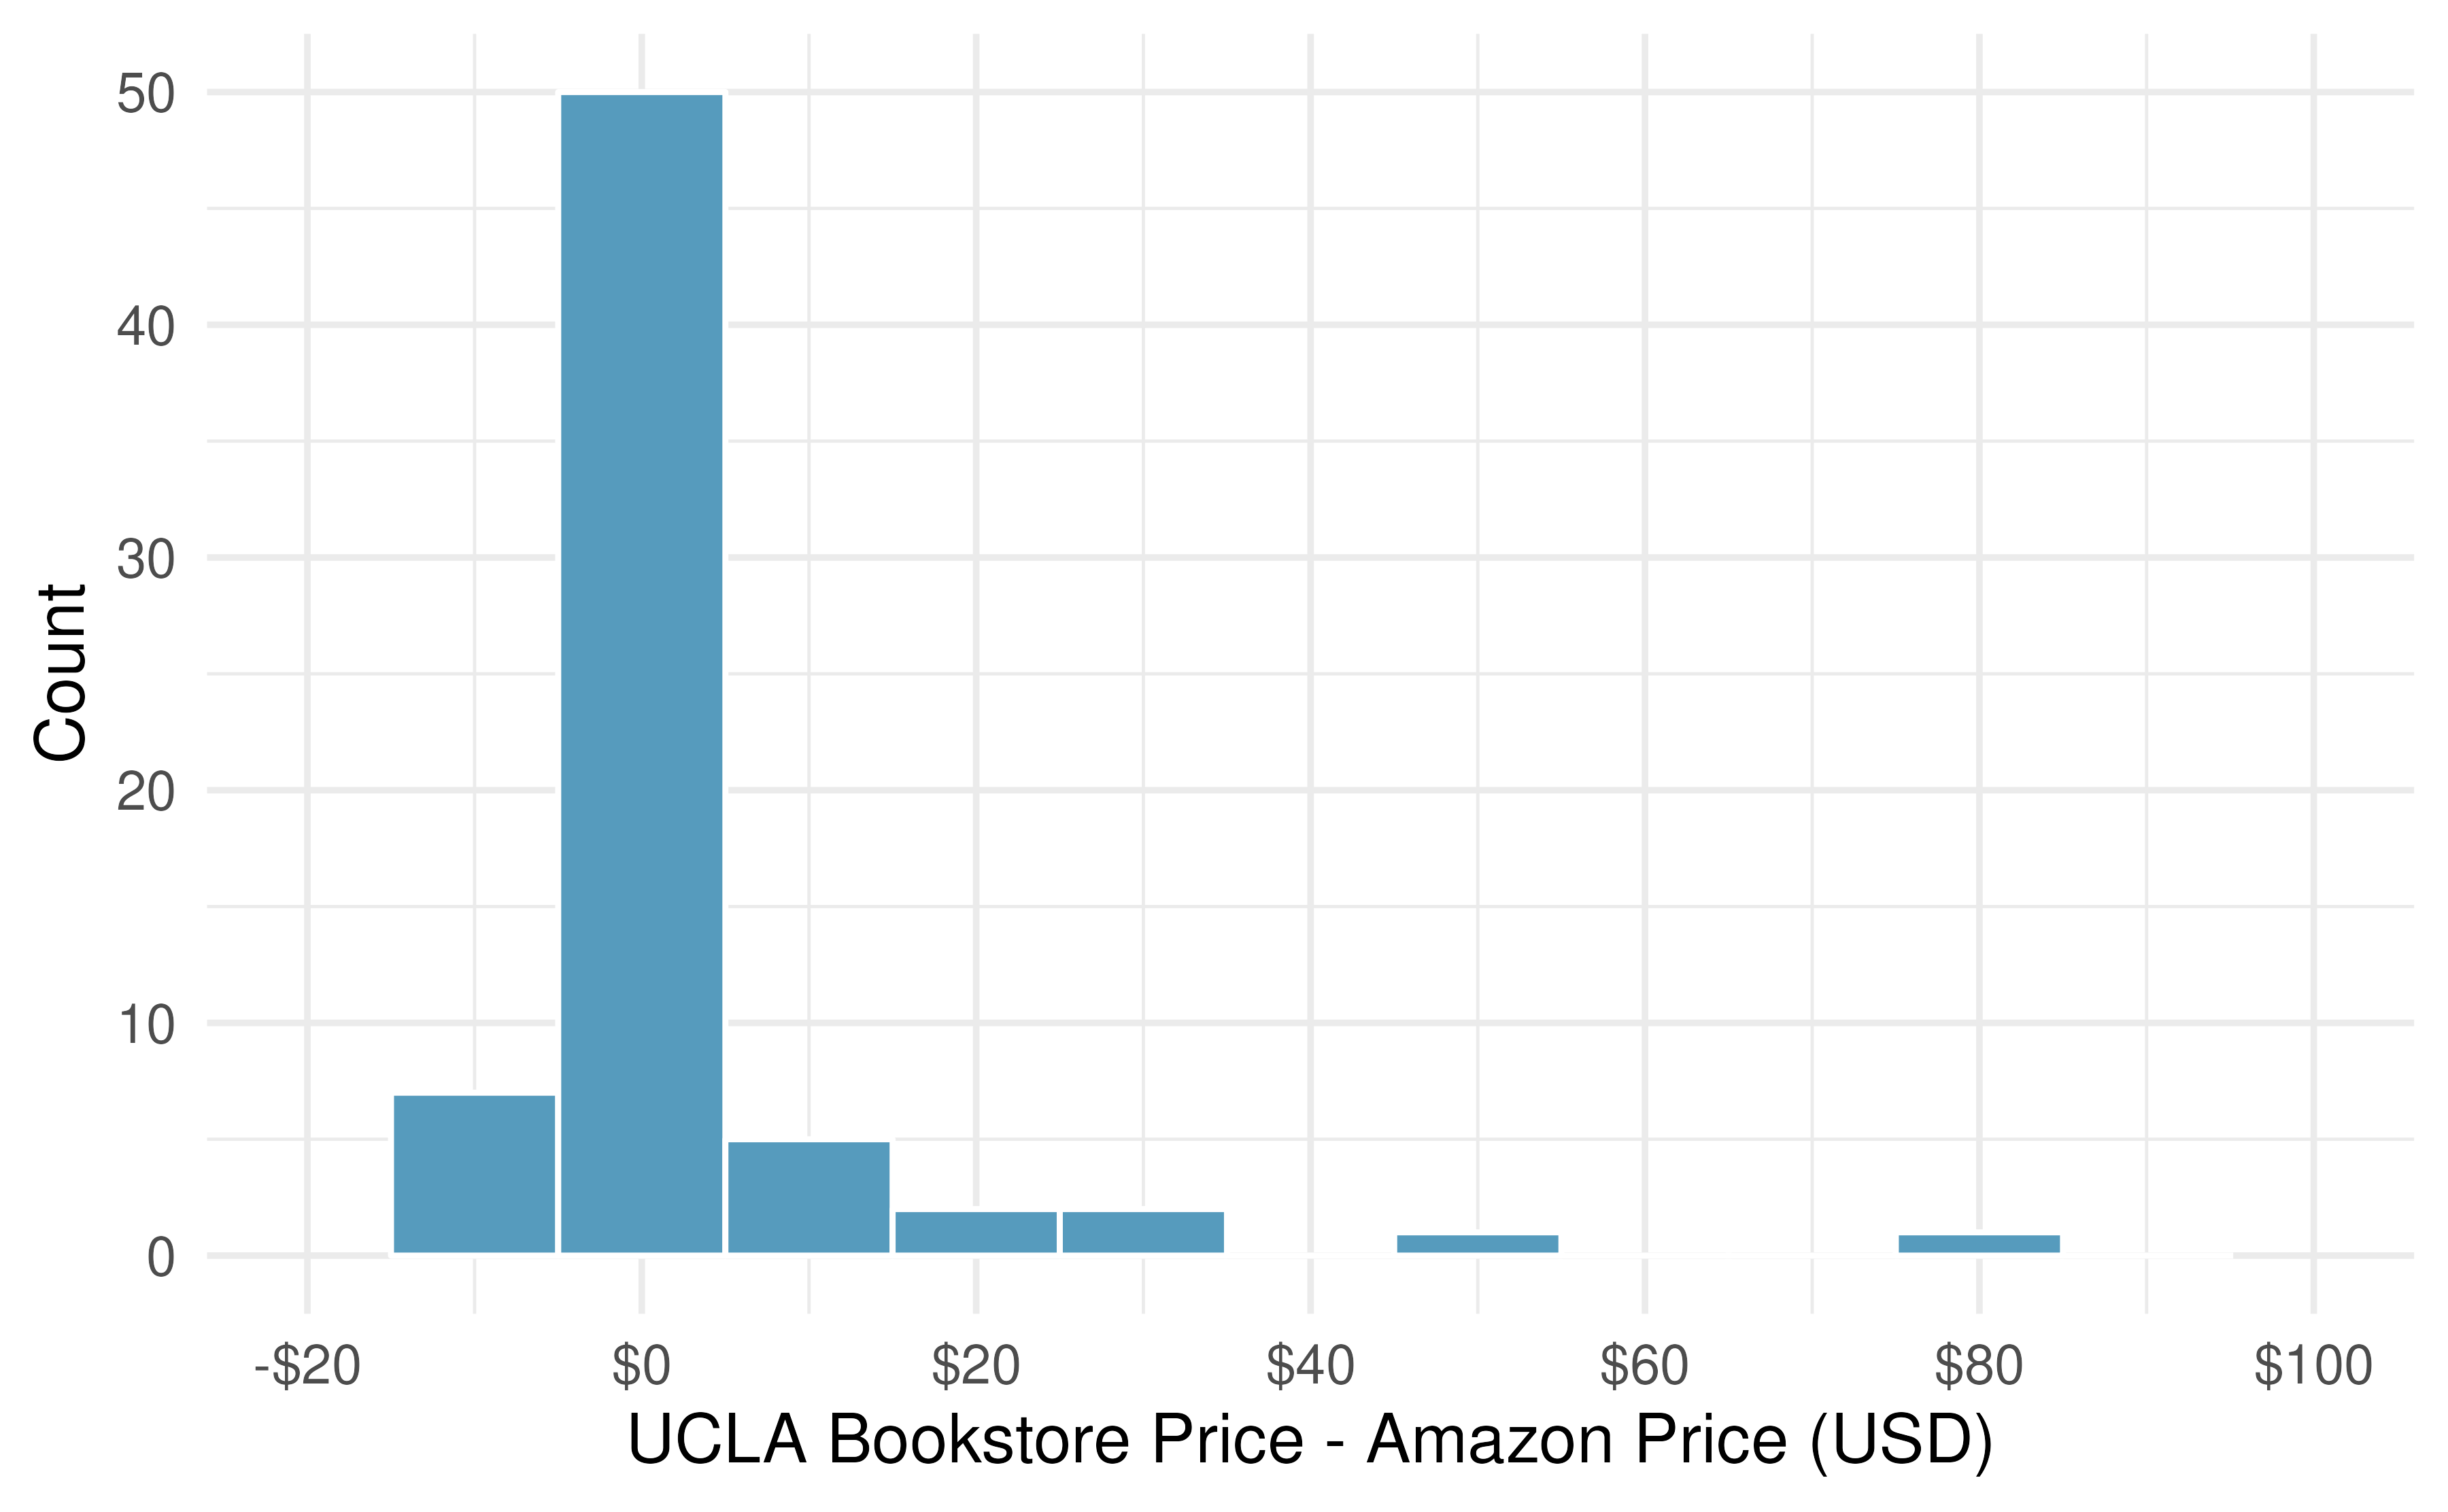 Histogram of the difference in price for each book sampled.